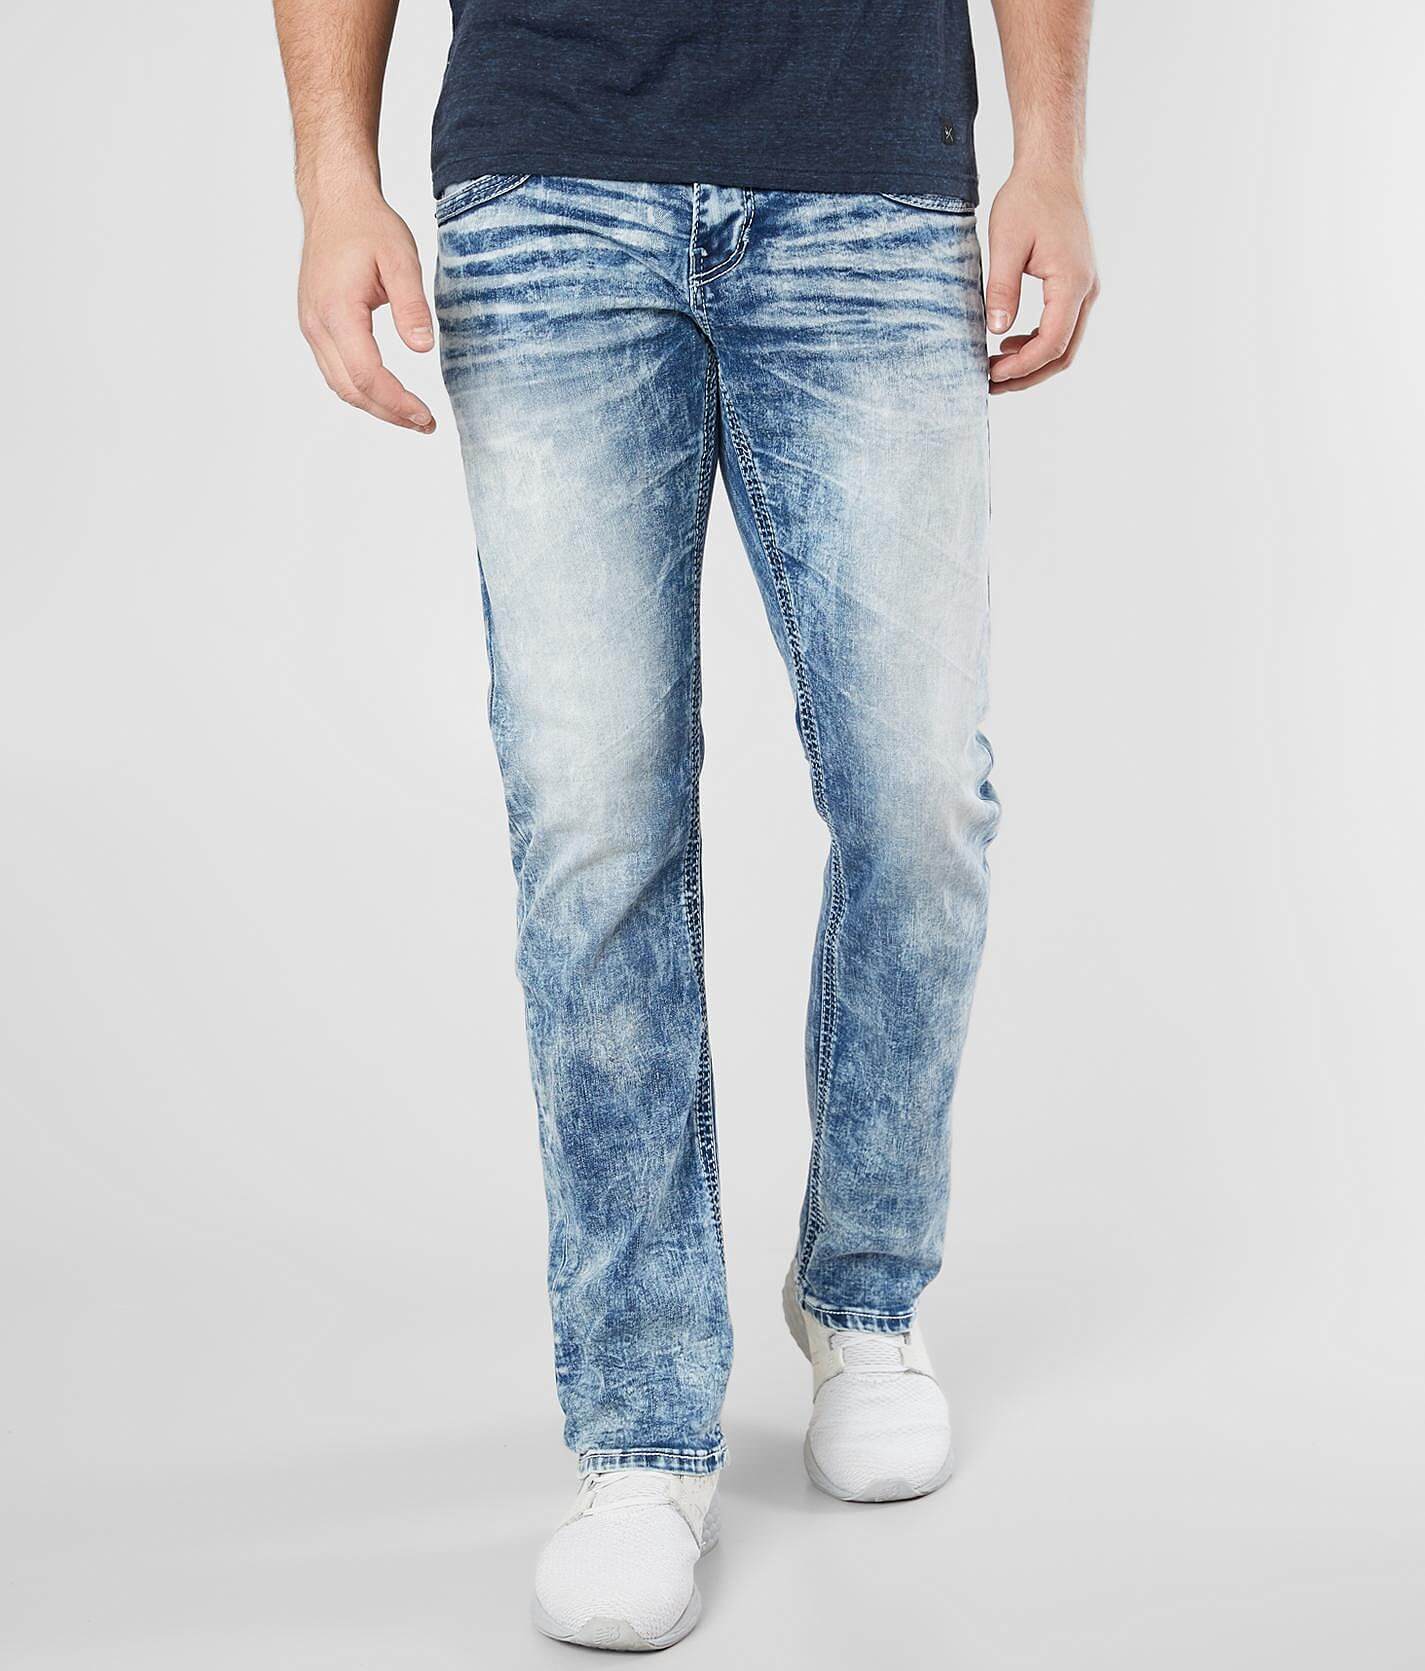 mens jeans from the buckle